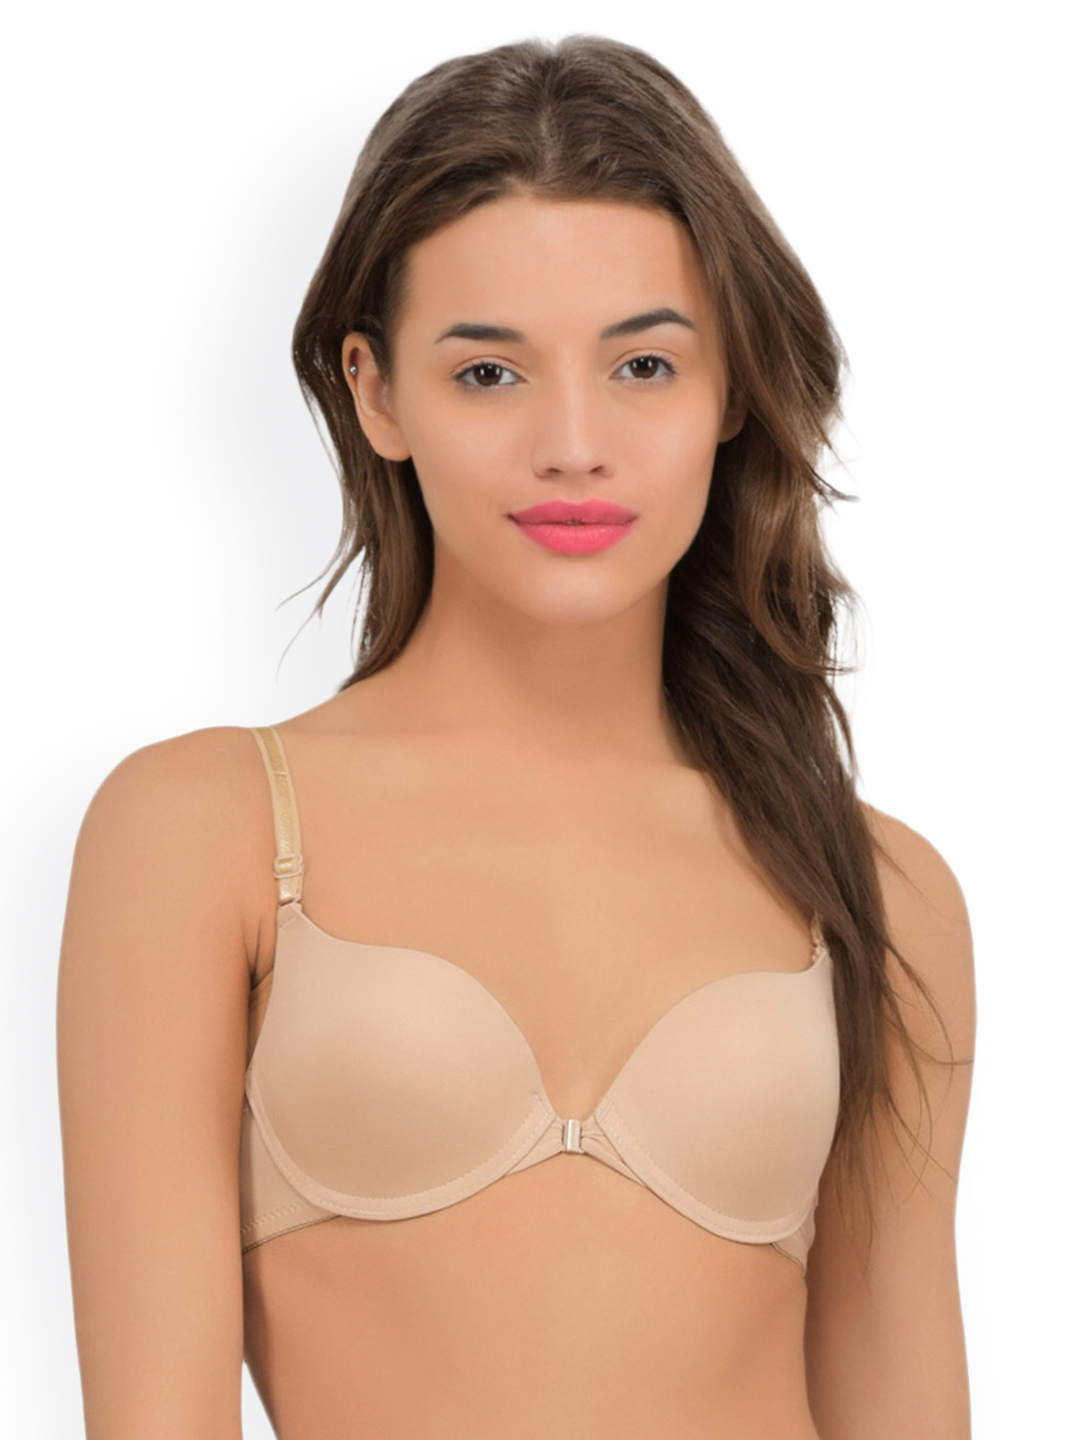 PrettyCat Beige Solid Underwired Lightly Padded Push-Up Bra PCBR20304736B Price in India